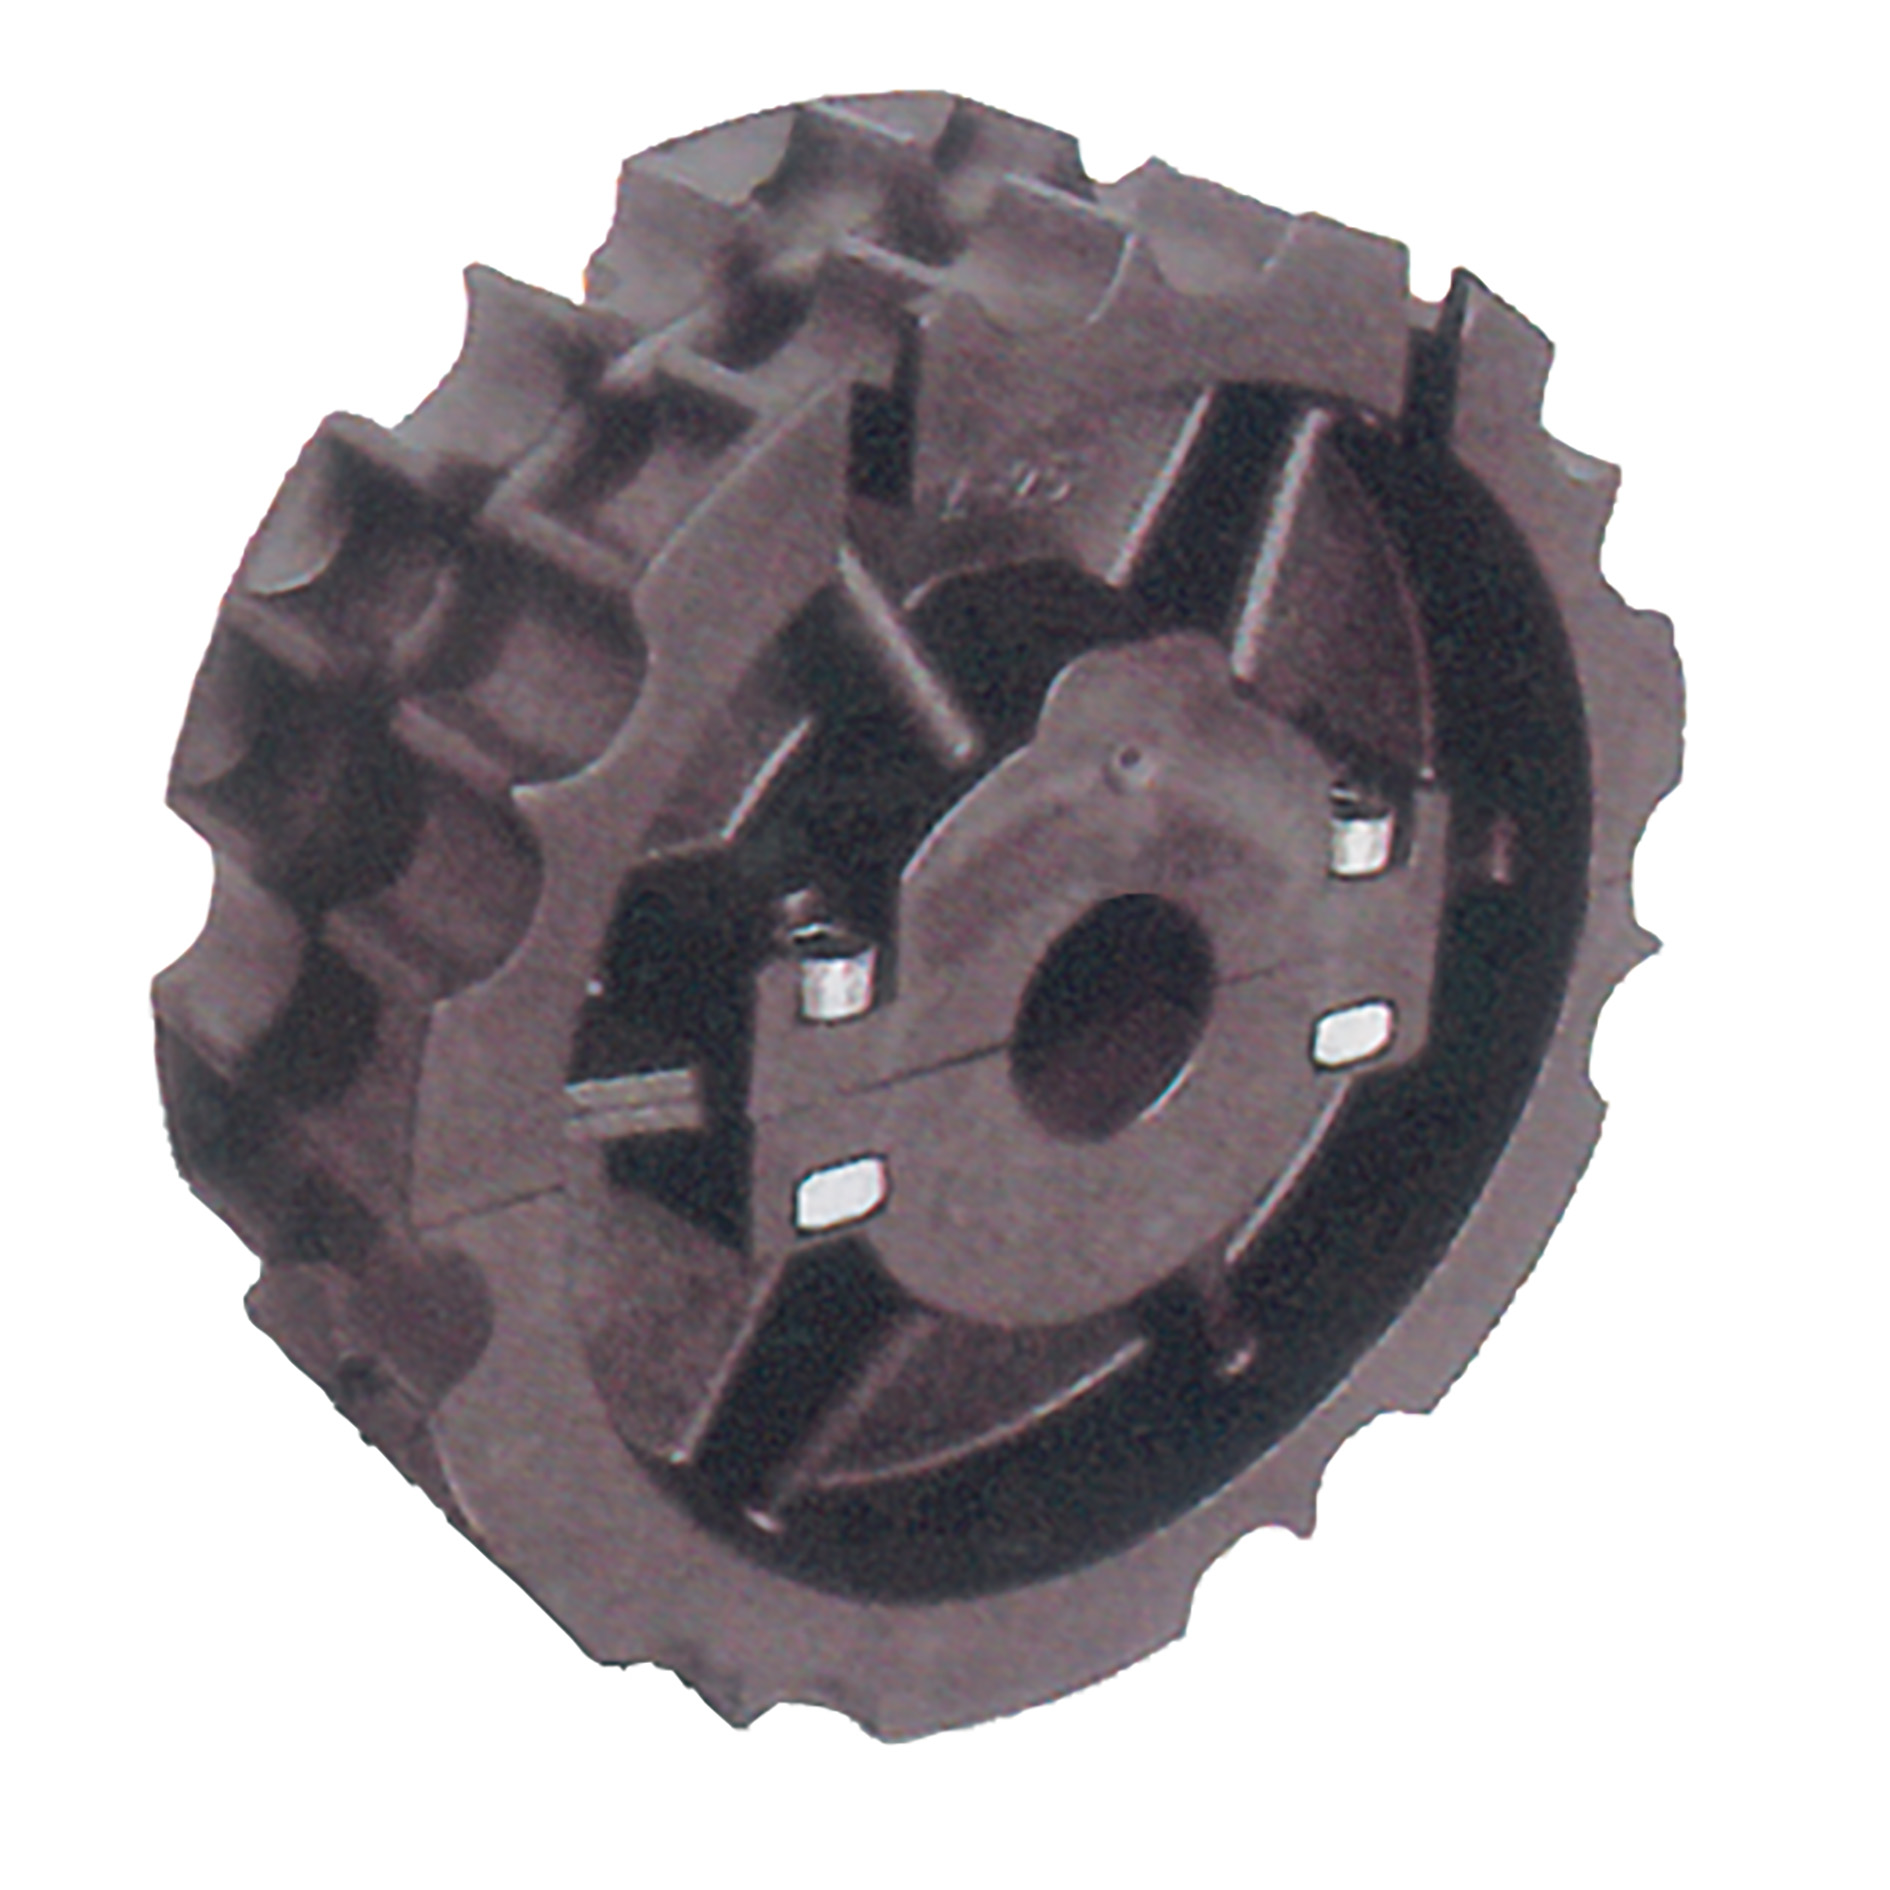 Idler sprocket for slat top chain - Rangs  820 and 815 -  - 